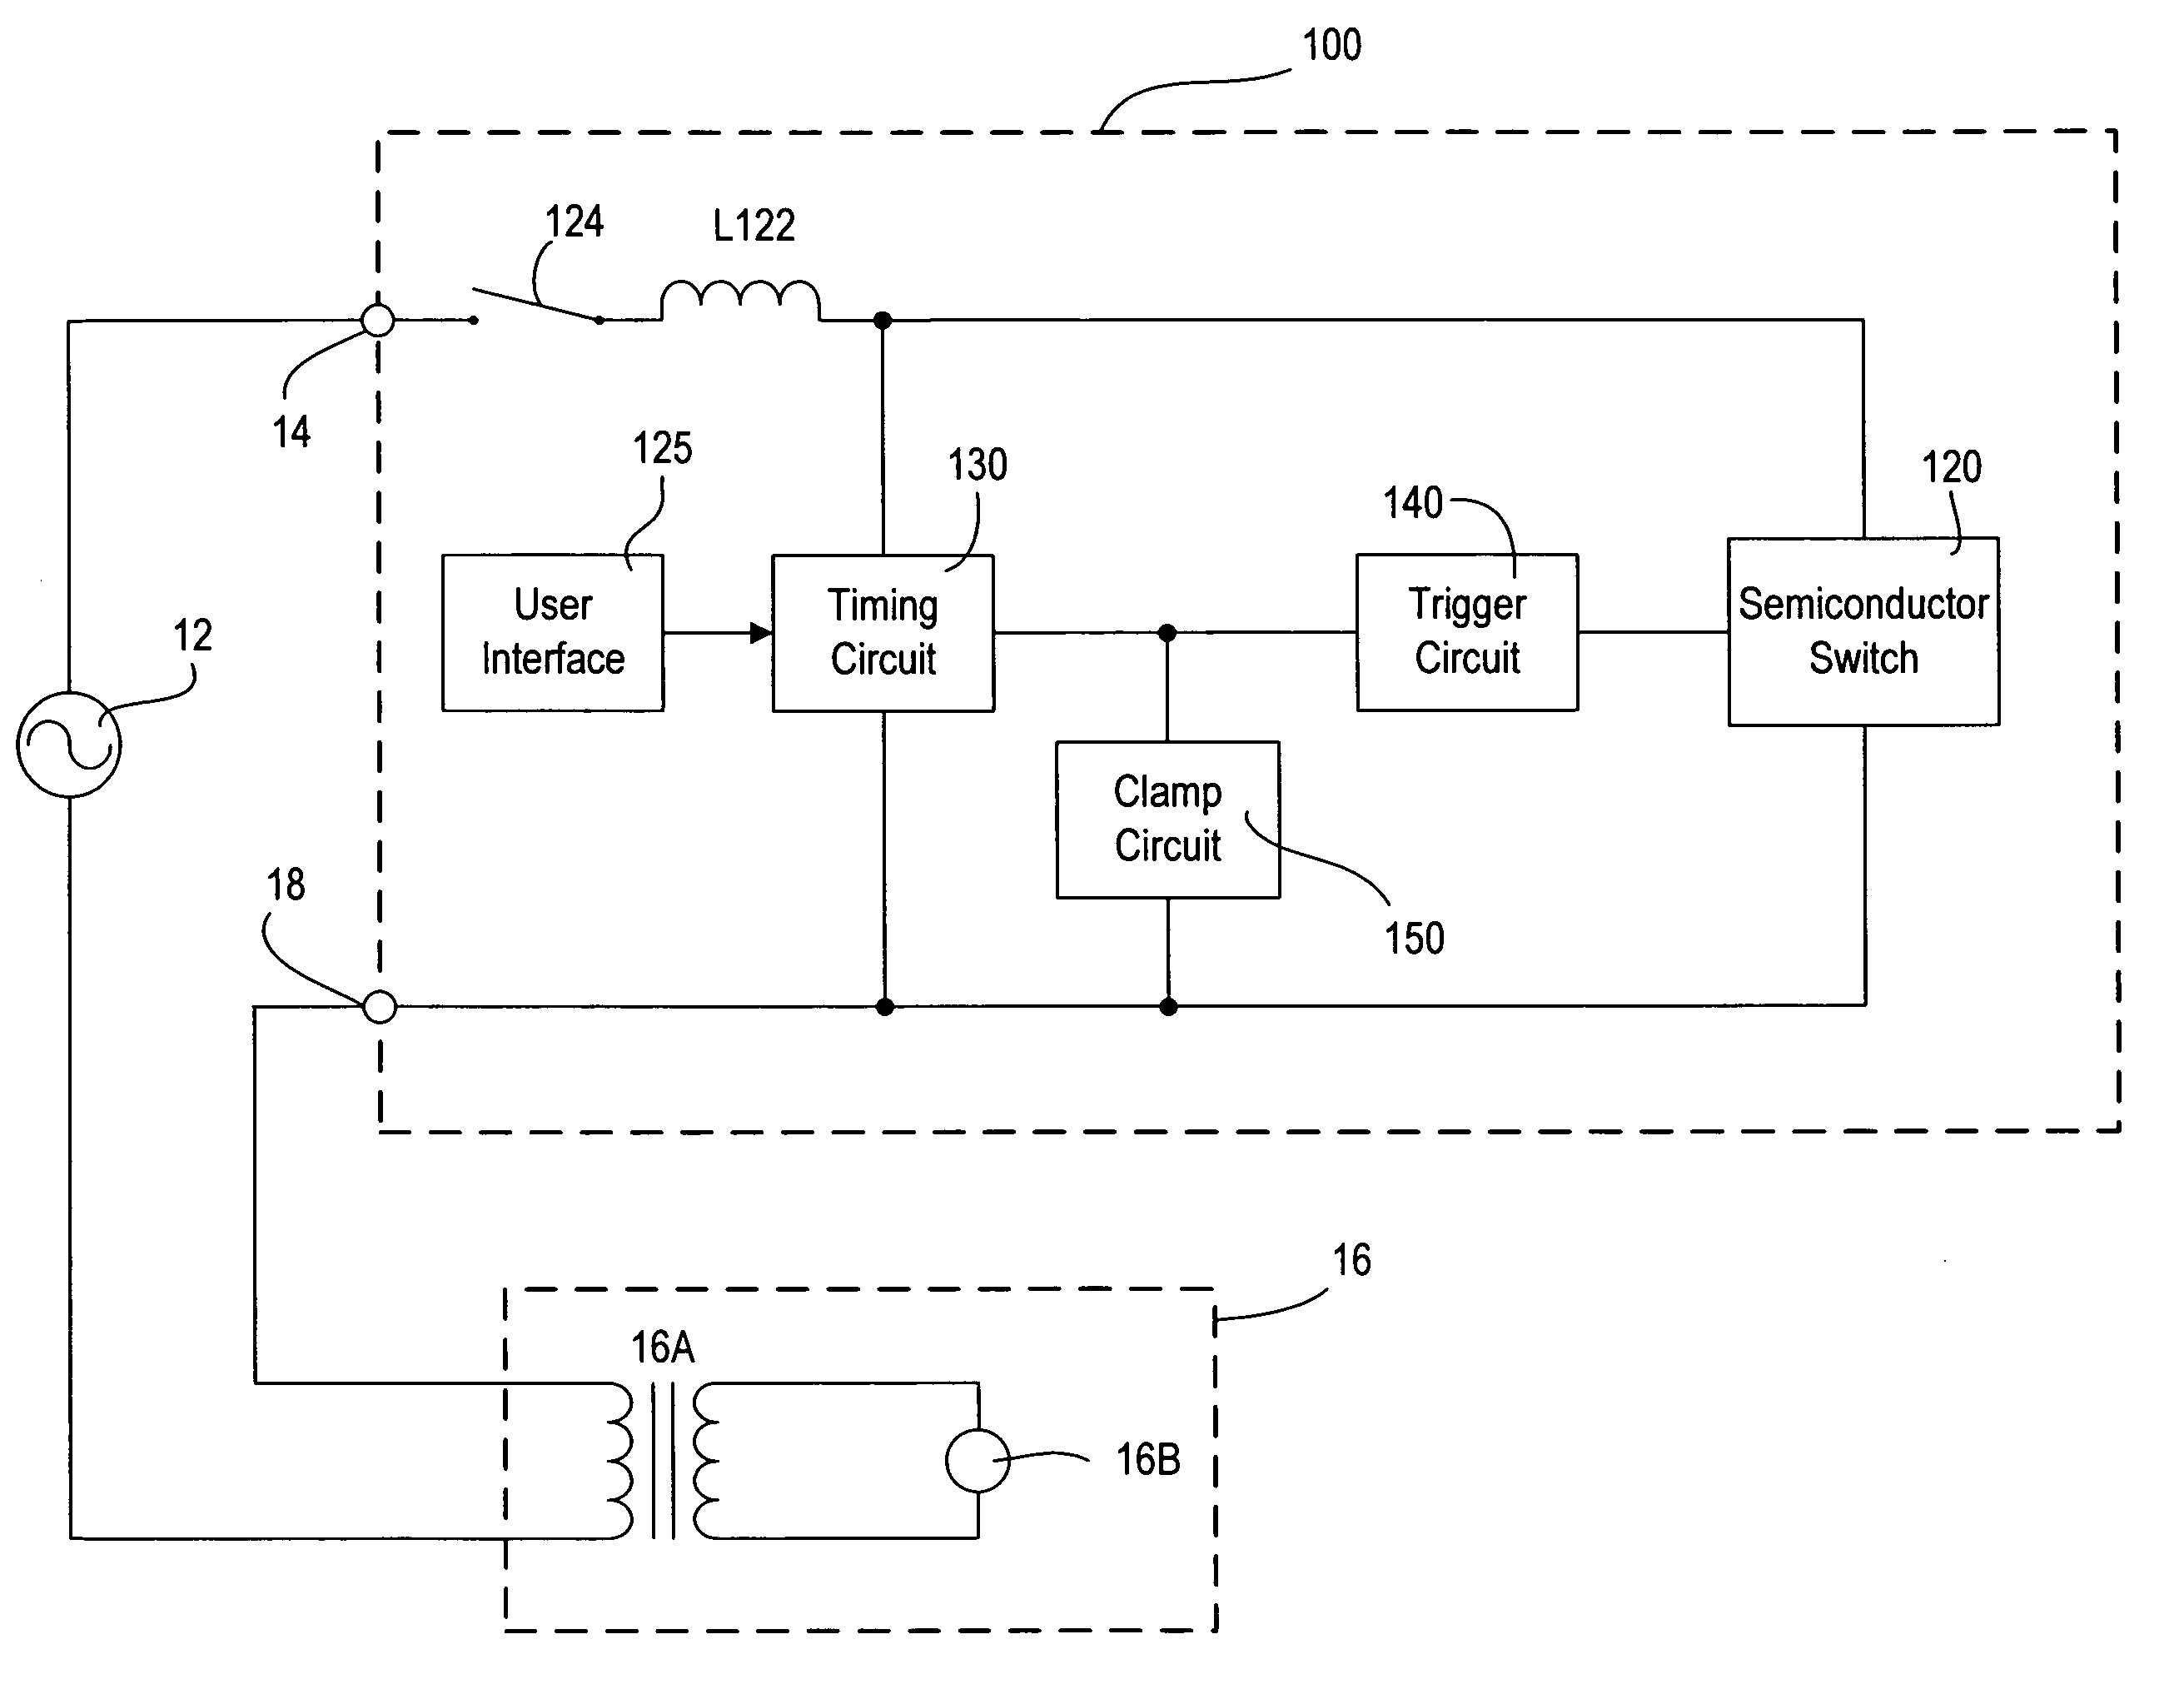 Dimmer for preventing asymmetric current flow through an unloaded magnetic low-voltage transformer